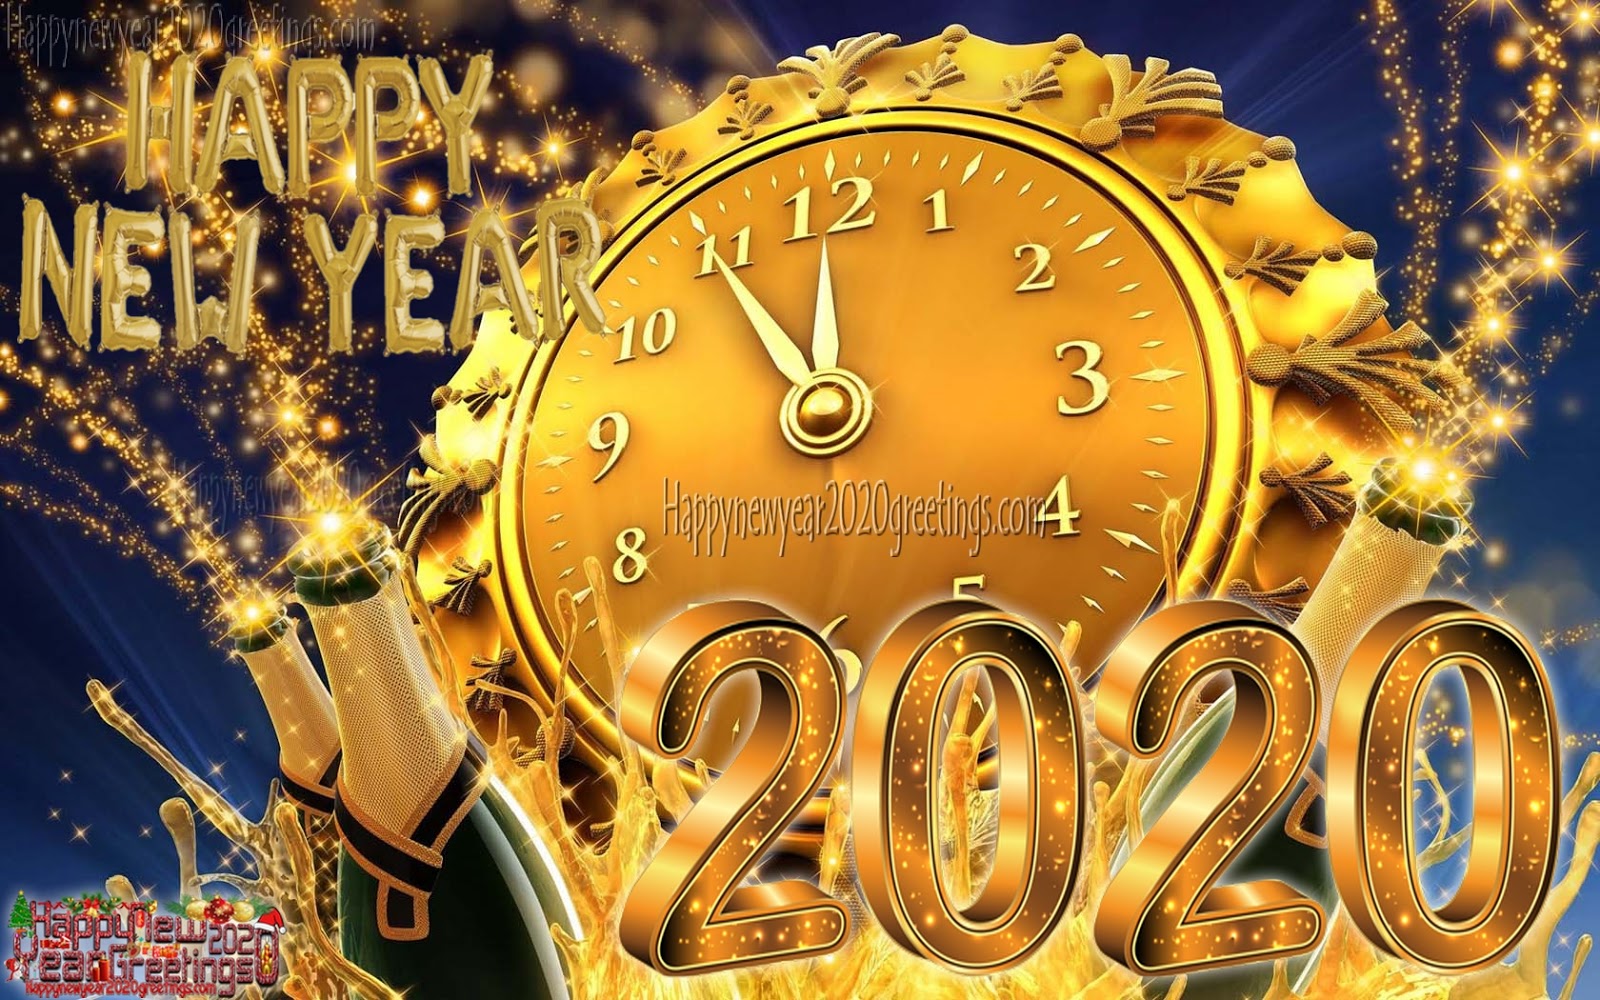 Free download Happy New Year 2020 Images HD 1080p New Year 2020 ...